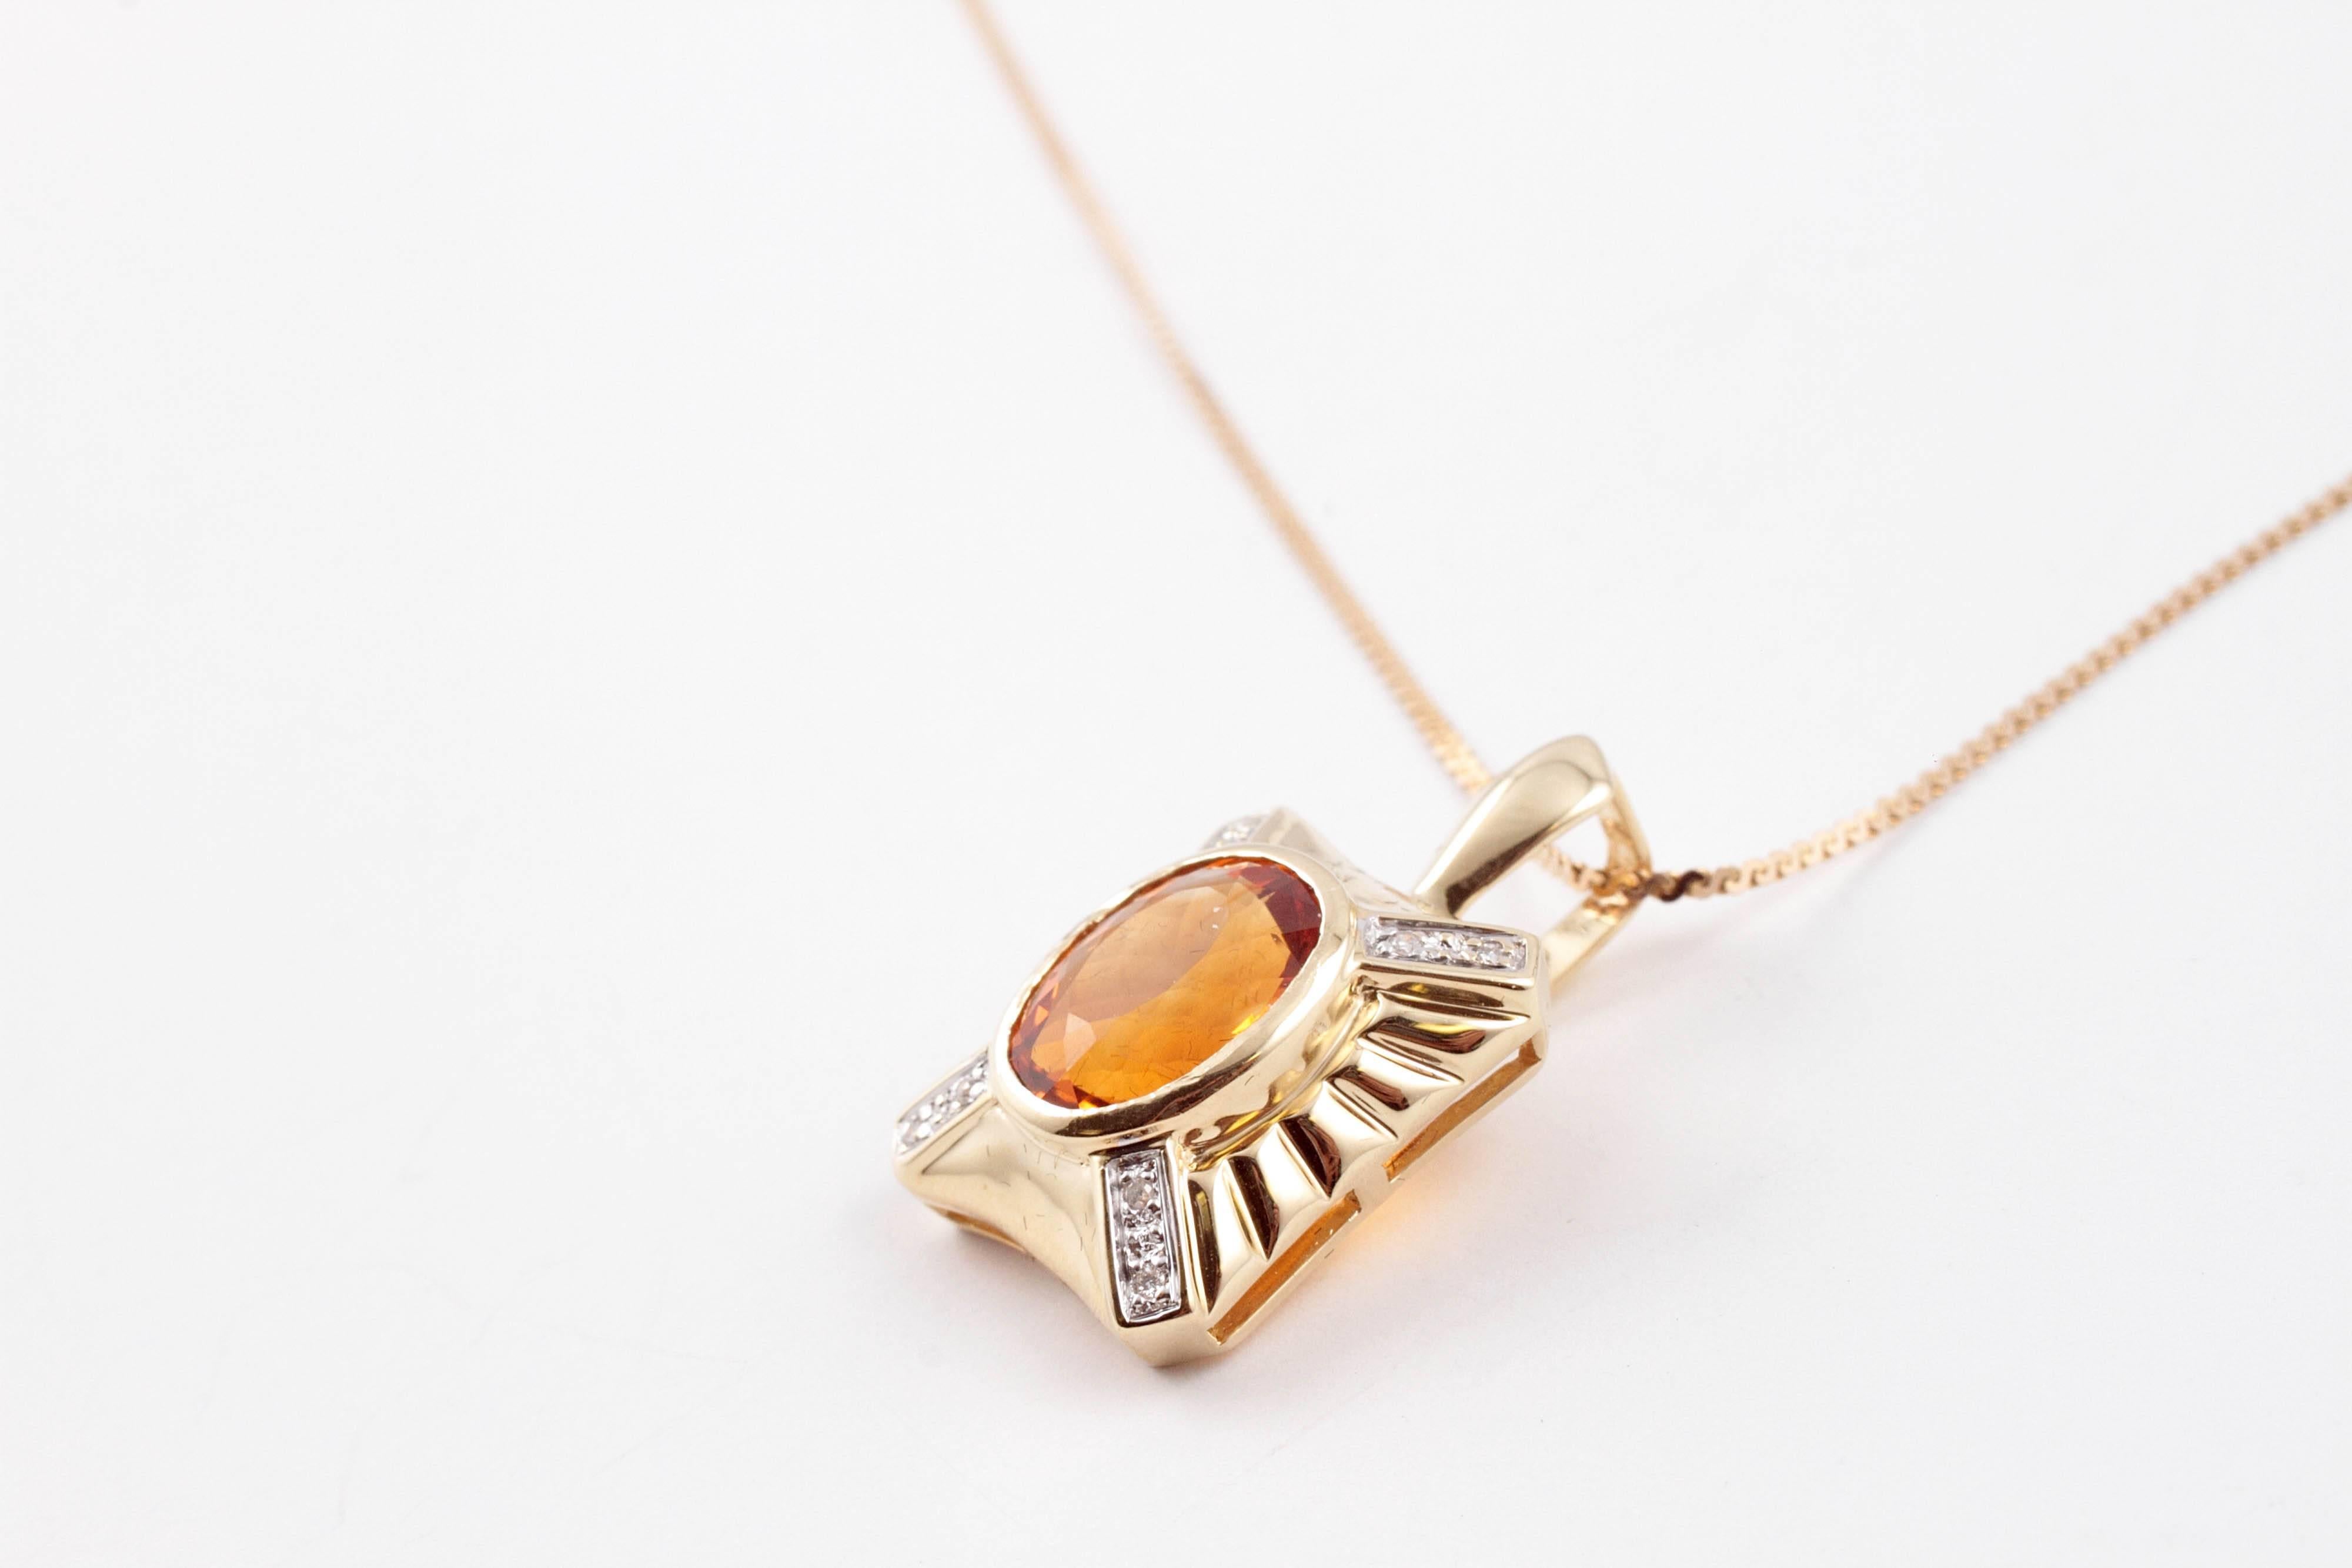 Lovely orange color, 24 inches in length, 14 karat yellow gold beauty!